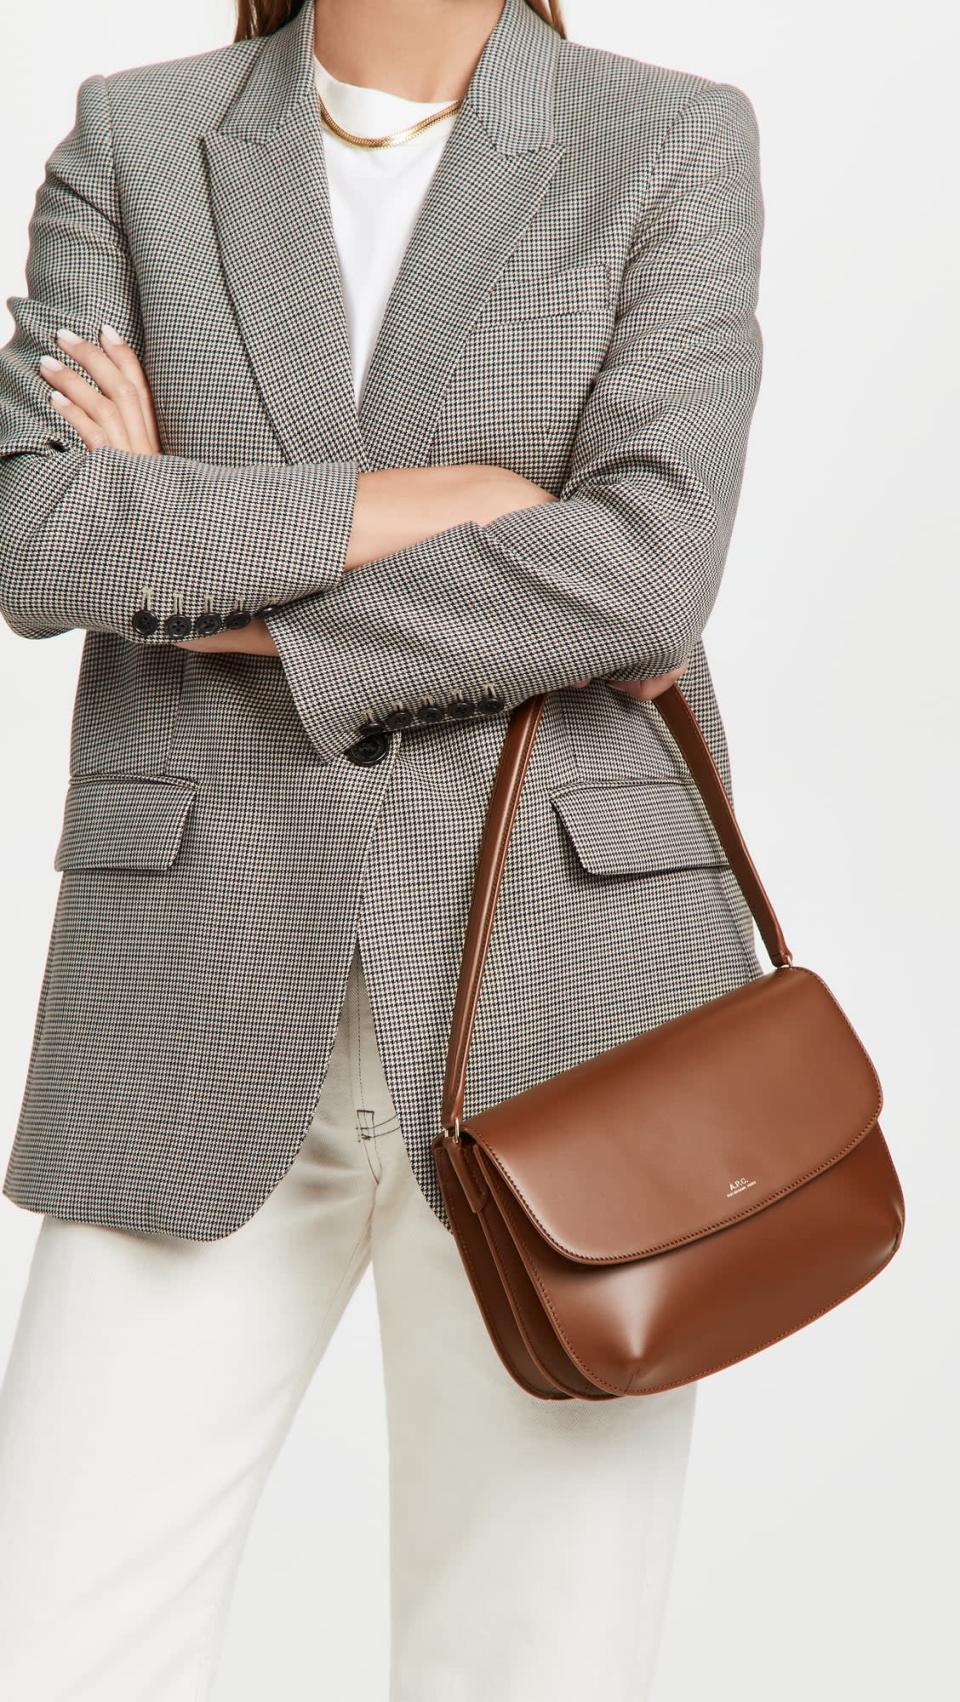 <p>When you want a great neutral but are bored of black, try a brown bag. You can't go wrong with the <span>A.P.C. Sarah Shoulder Bag</span> ($595). The perfect brown shade will easily pair with every outfit you have.</p>